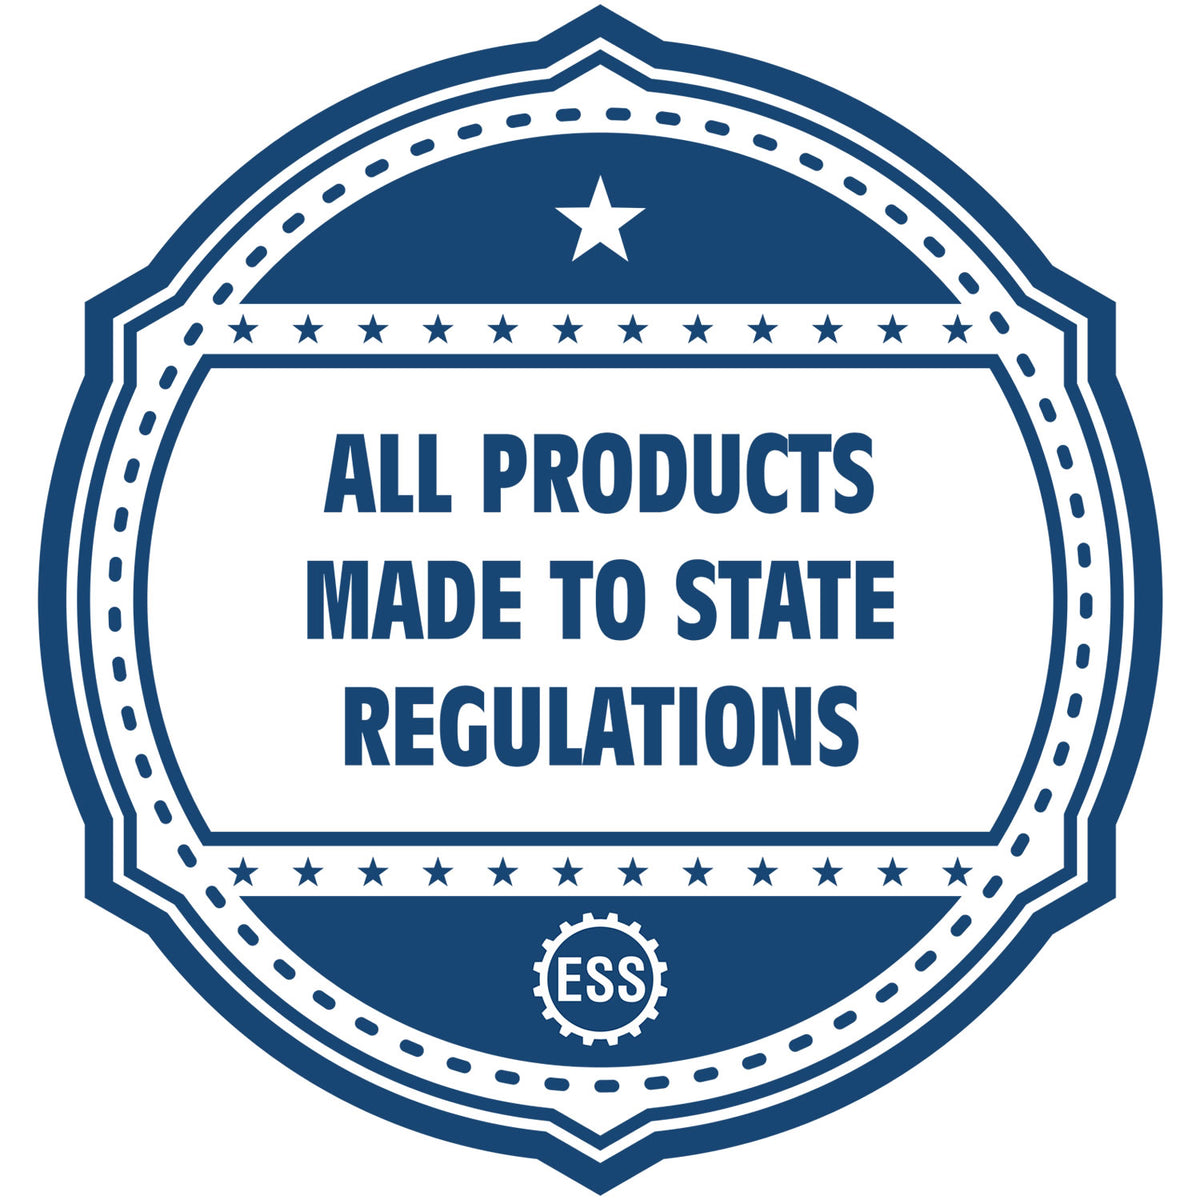 An icon or badge element for the MaxLight Premium Pre-Inked Nevada State Seal Notarial Stamp showing that this product is made in compliance with state regulations.